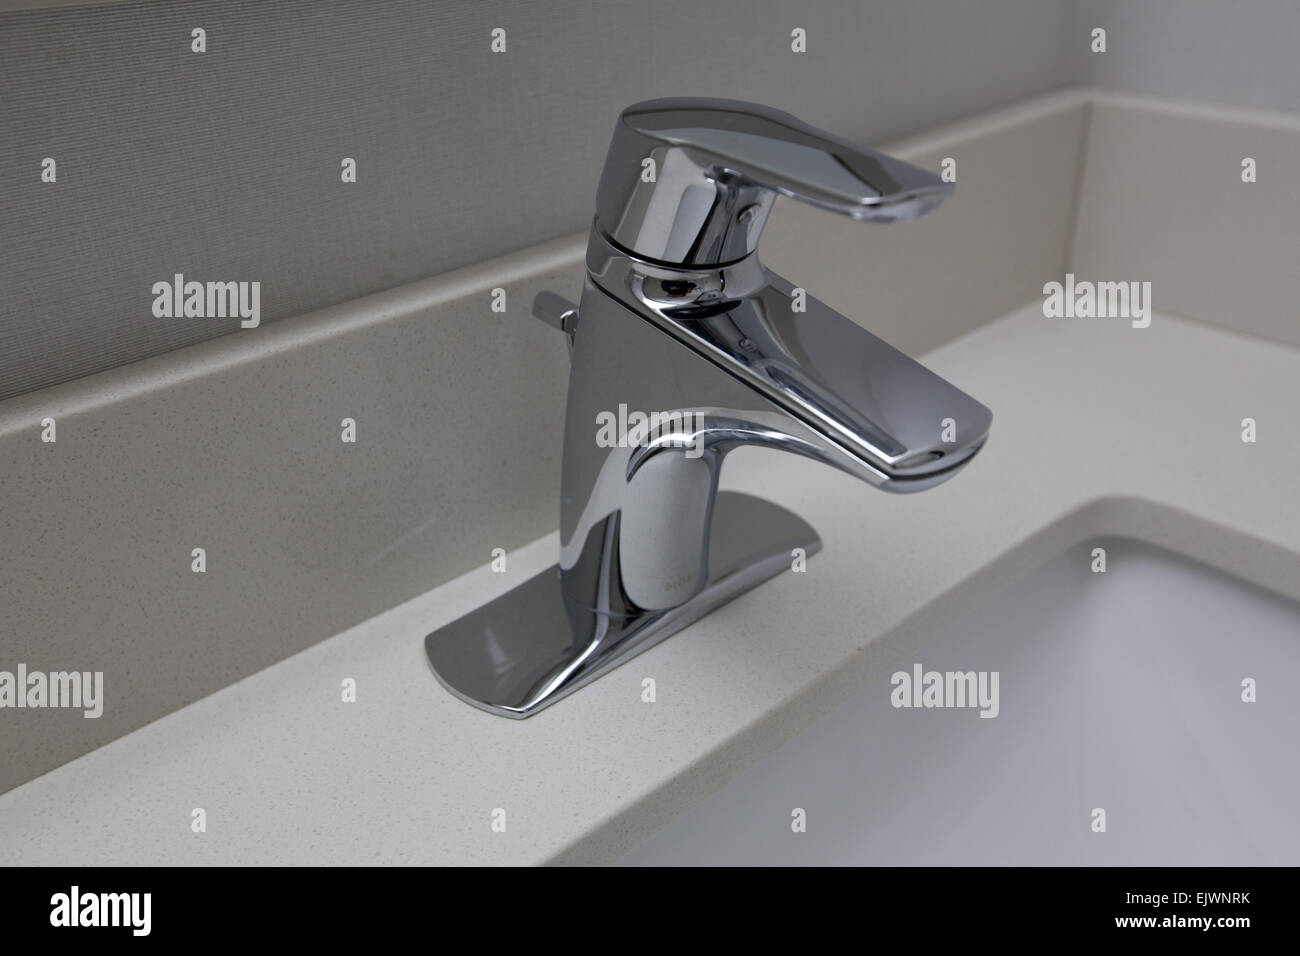 washroom stainless steel faucet Stock Photo